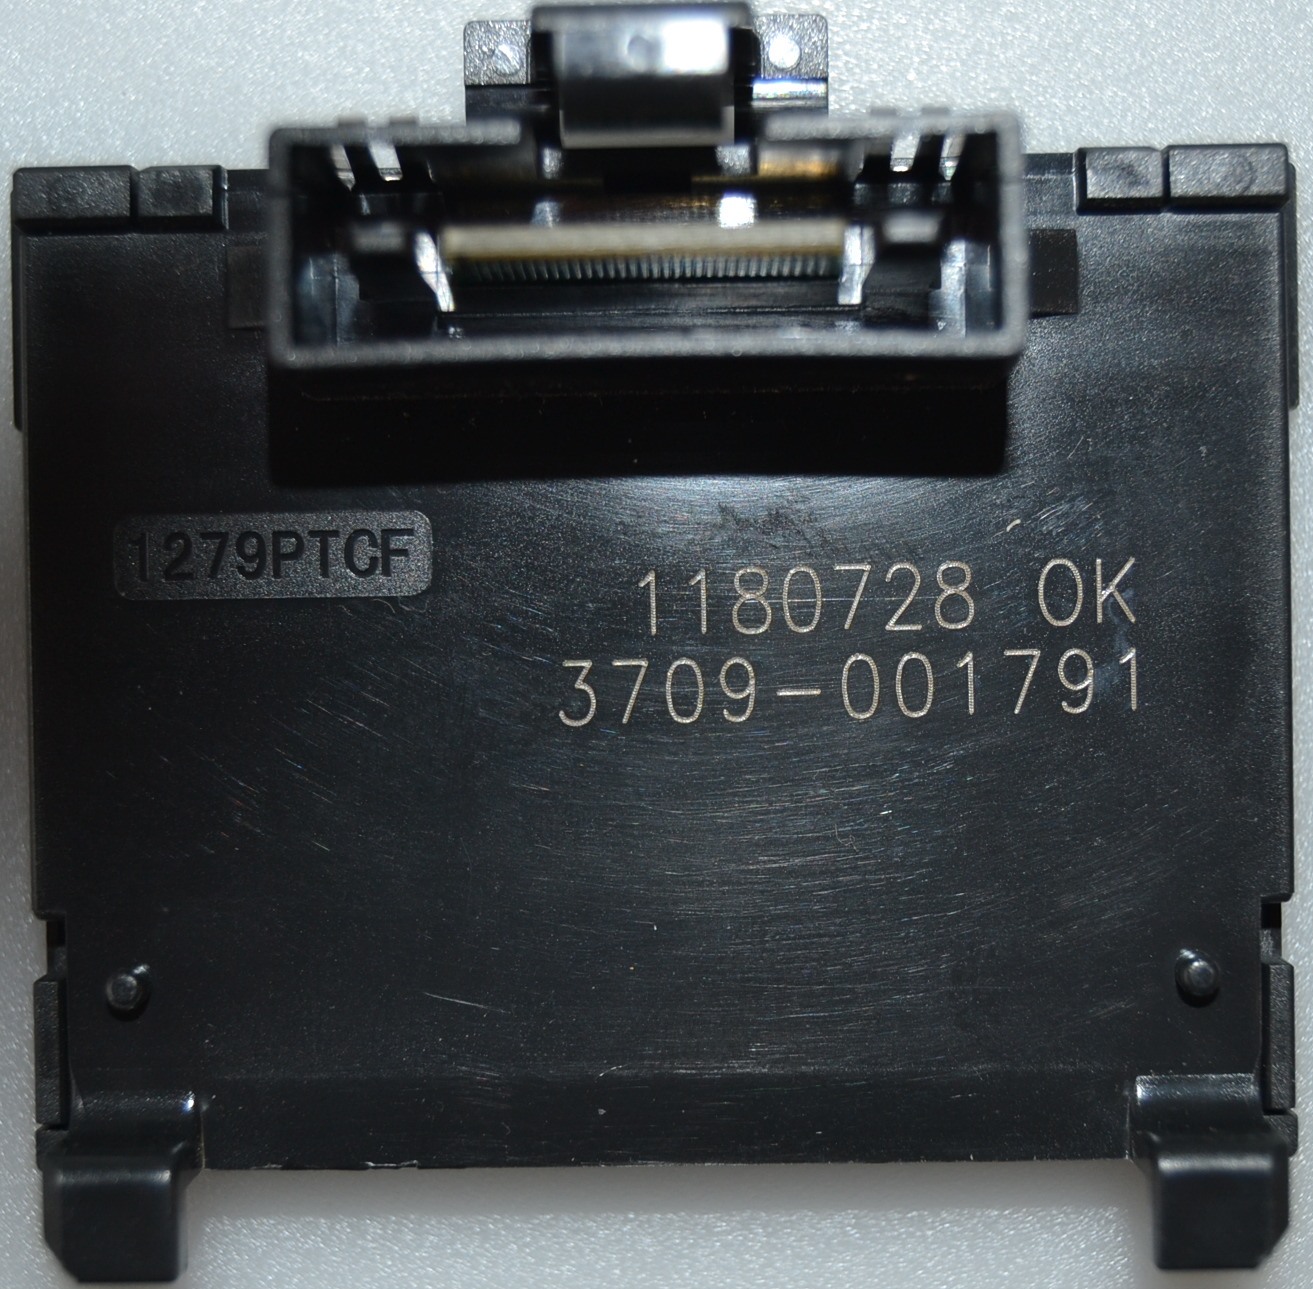 CON/SAMSUNG CONNECTOR-CARD SLOT, 3709-001791,,Common Interface 5v,for SAMSUNG LED TV 